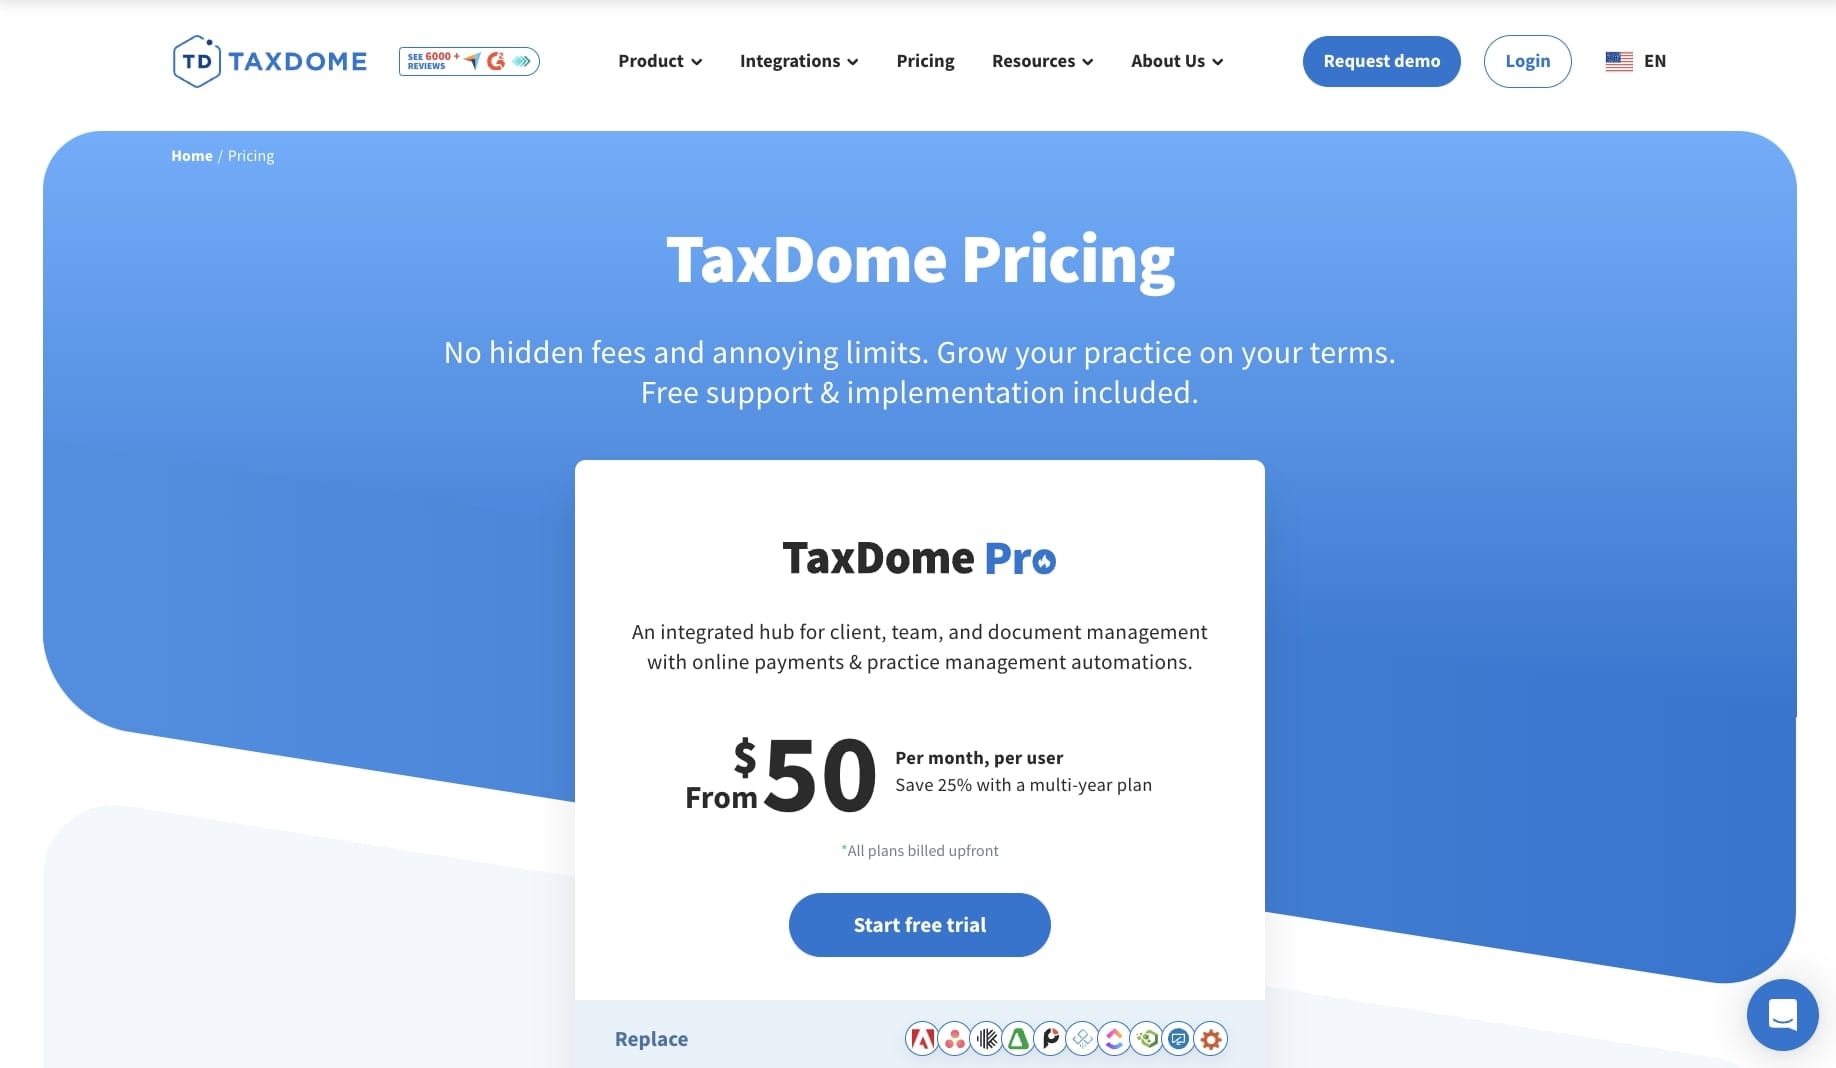 TaxDome's pricing